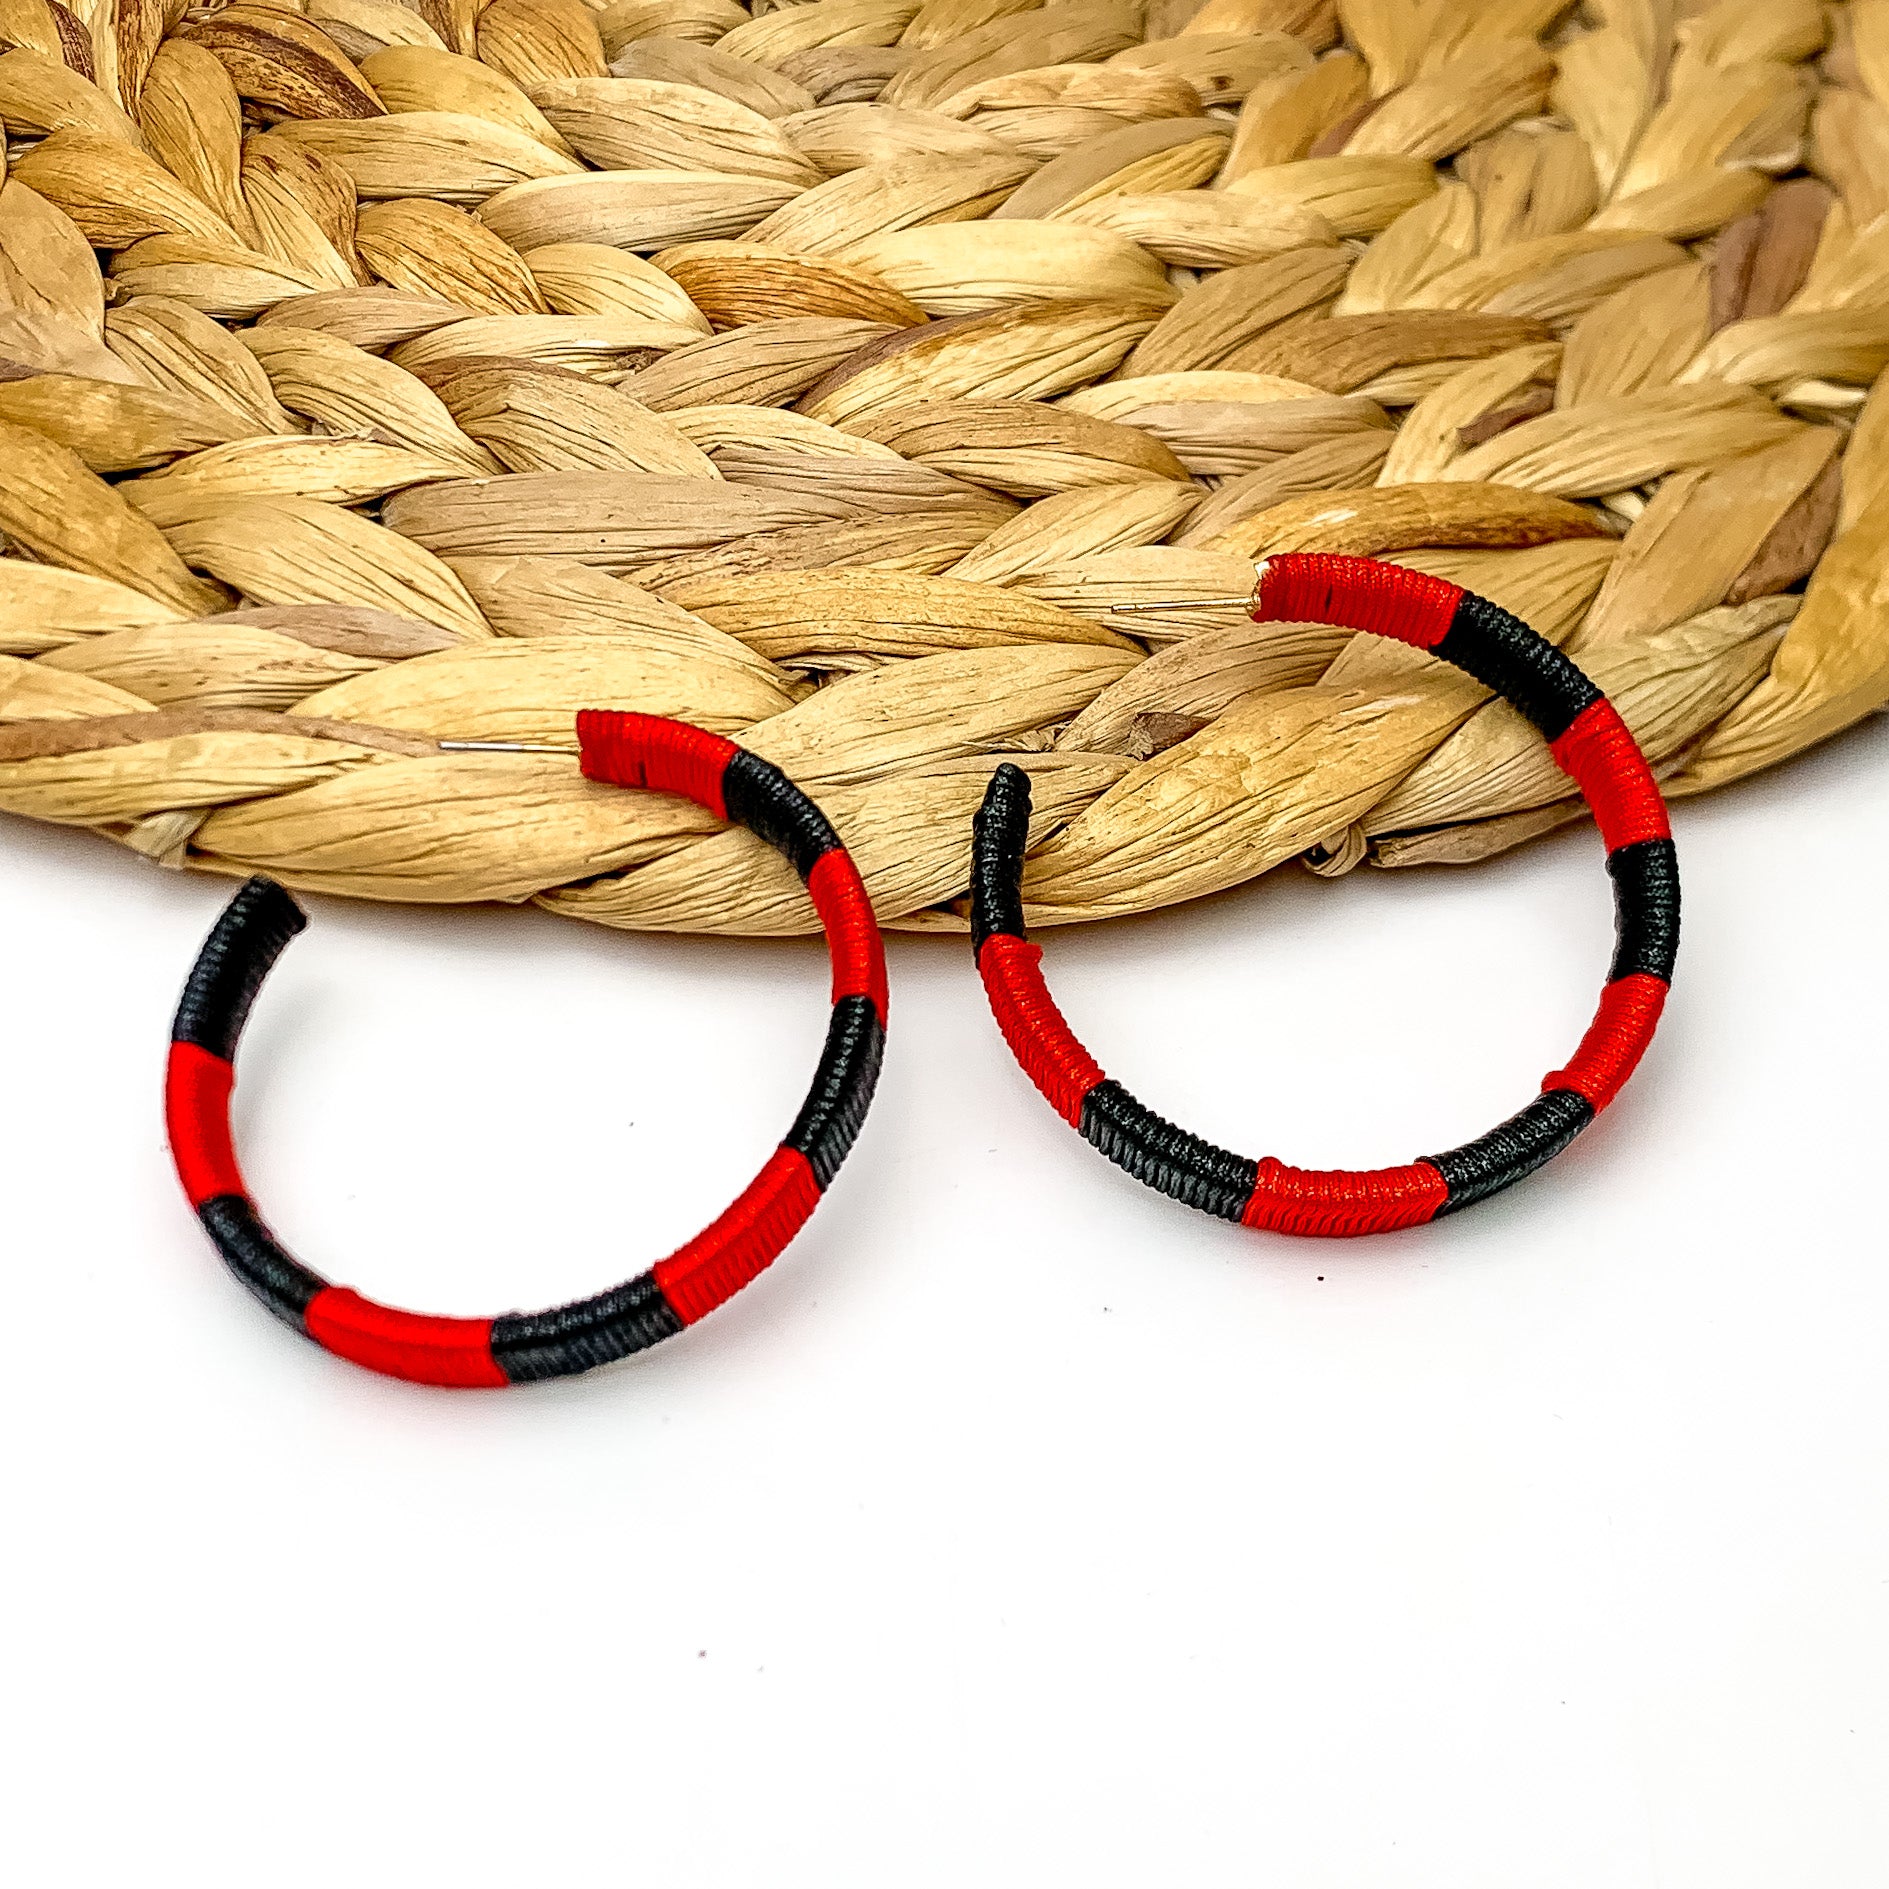 Game Day Glam Colored Hoop Earrings in Black and Red. The two colored hoops are laying against a woven decoration with a white background.